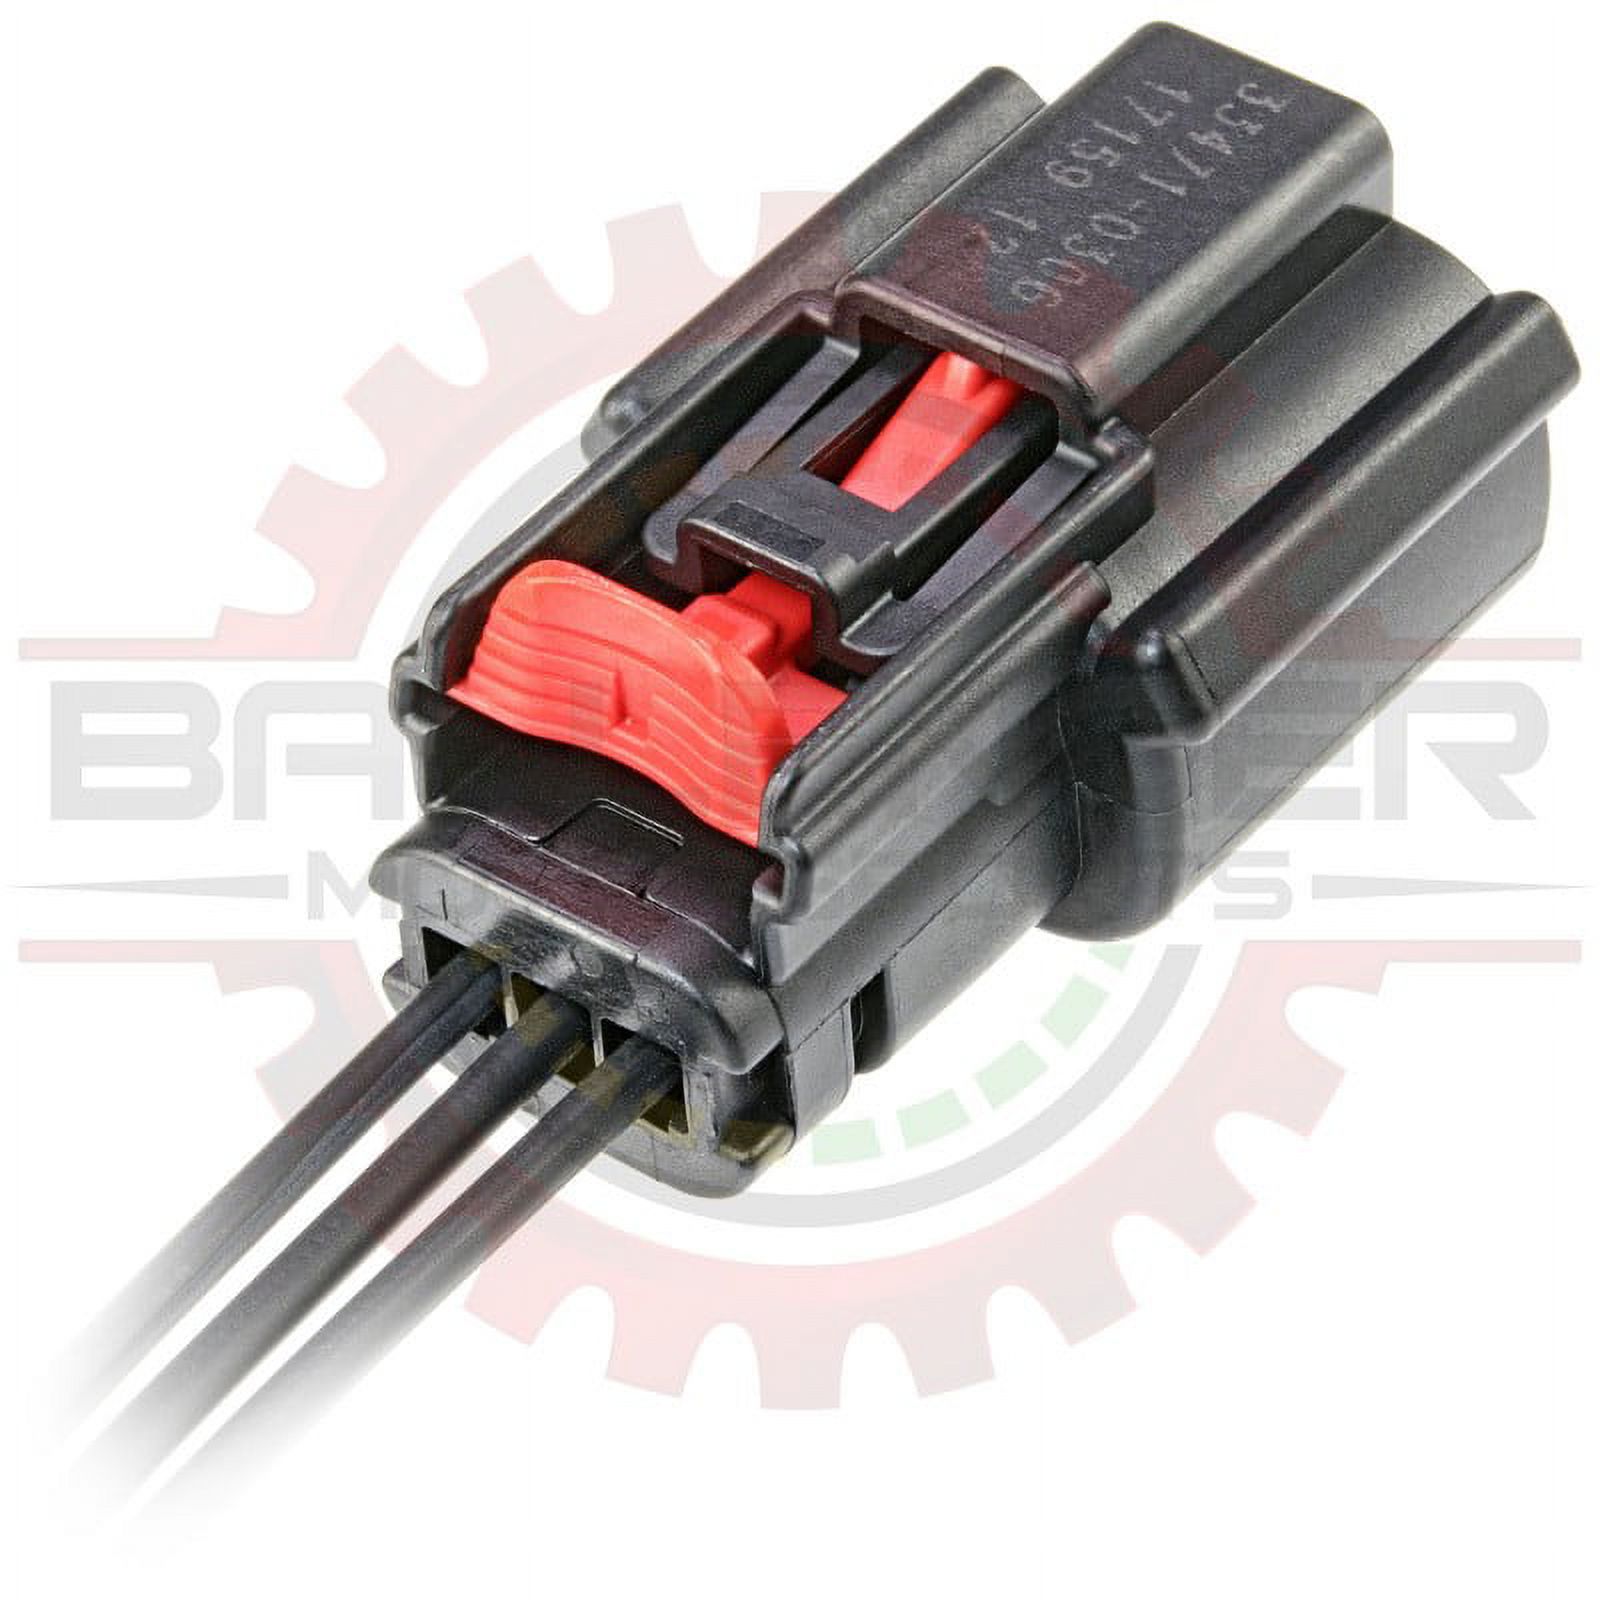 Ballenger Motorsports - 3 Way Ignition Coil & Sensor Connector Pigtail Compatible with Ford / Mazda - image 3 of 3